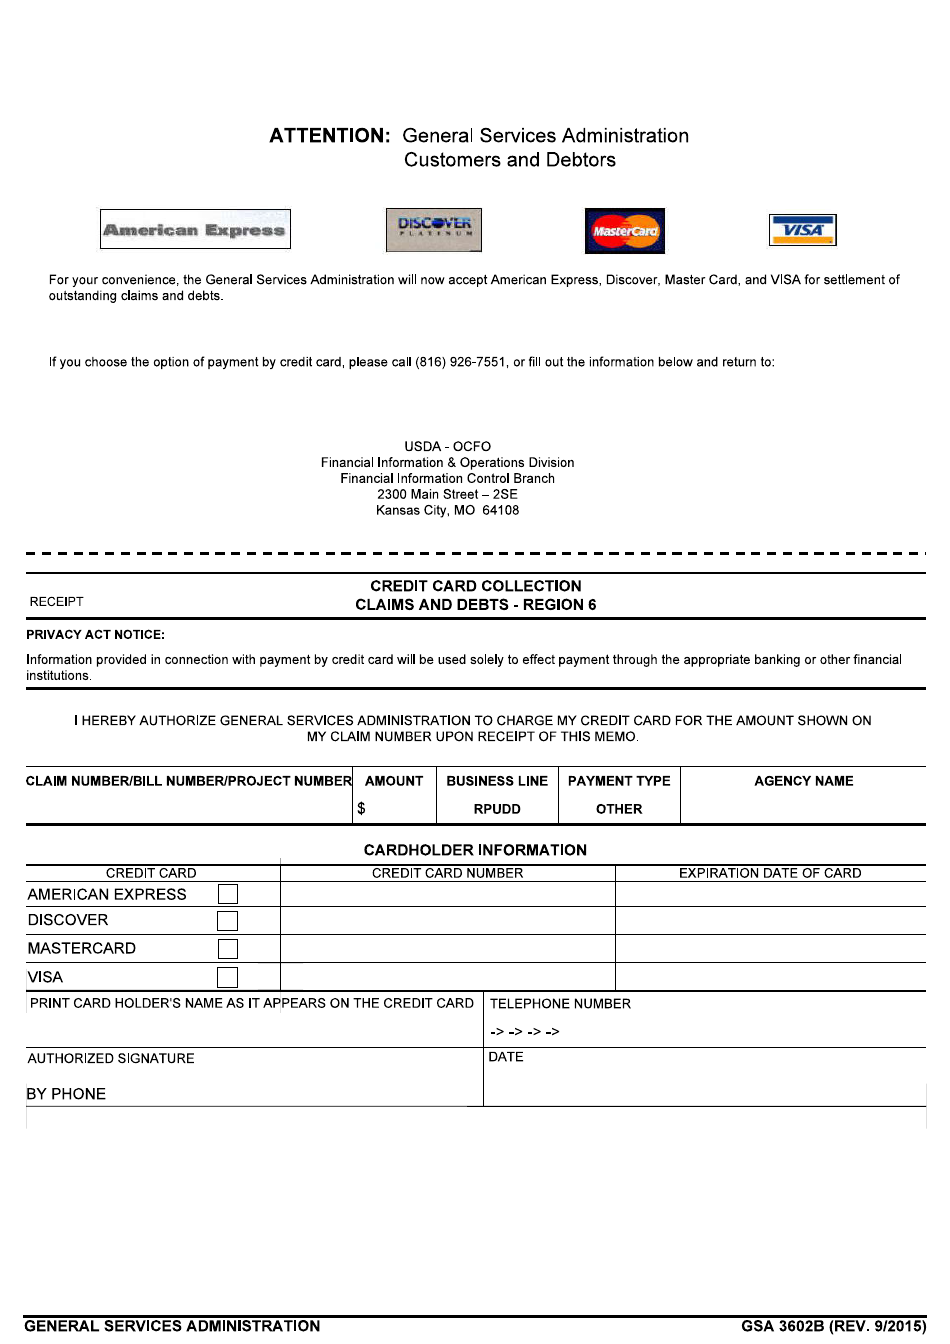 GSA Form 3602B Credit Card Collection - Claims and Debts - Region 6, Page 1